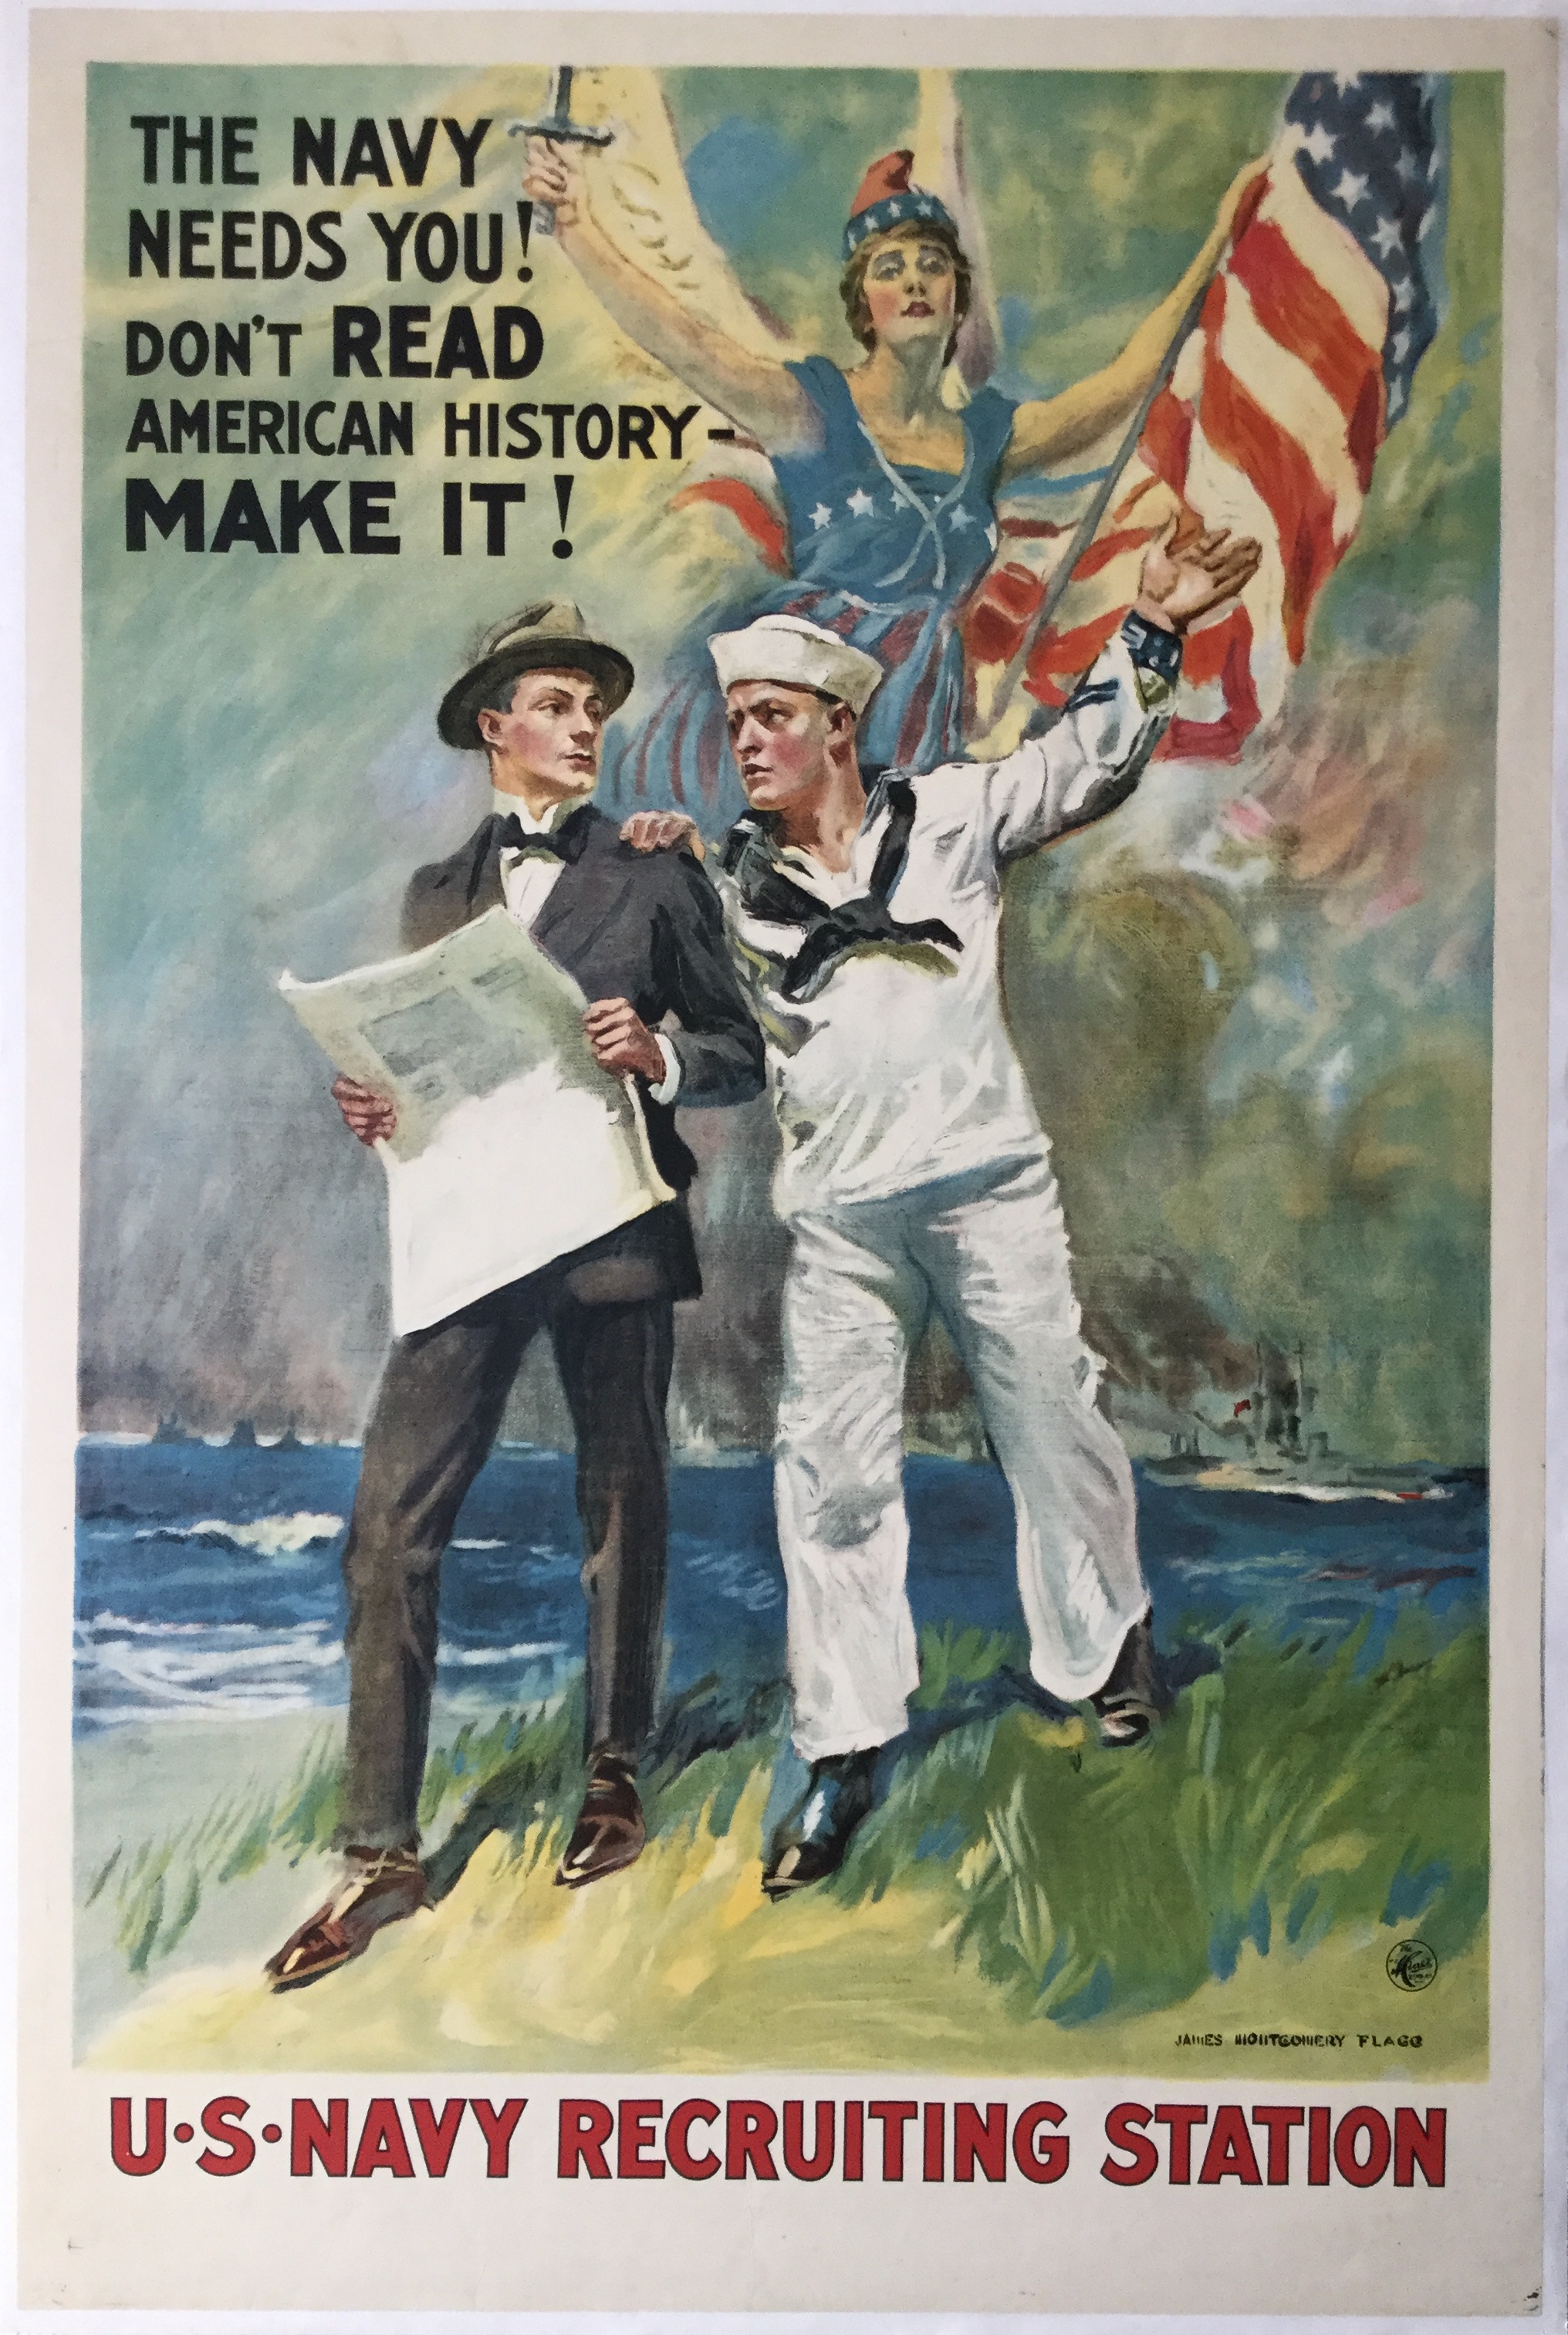 WW942	NAVY NEEDS YOU - DON'T READ AMERICAN HISTORY - MAKE IT!